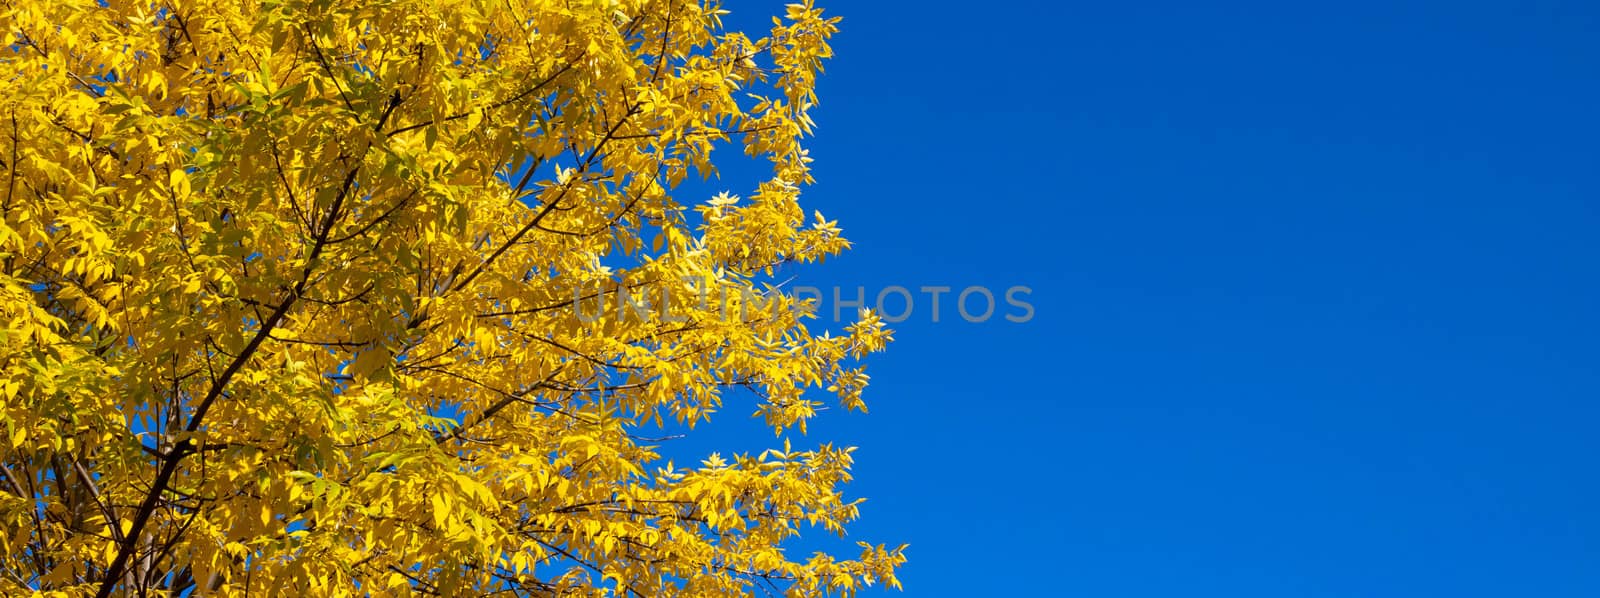 Autumn nature background. Panorama of yellow autumn leaves of ash against a blue sky.